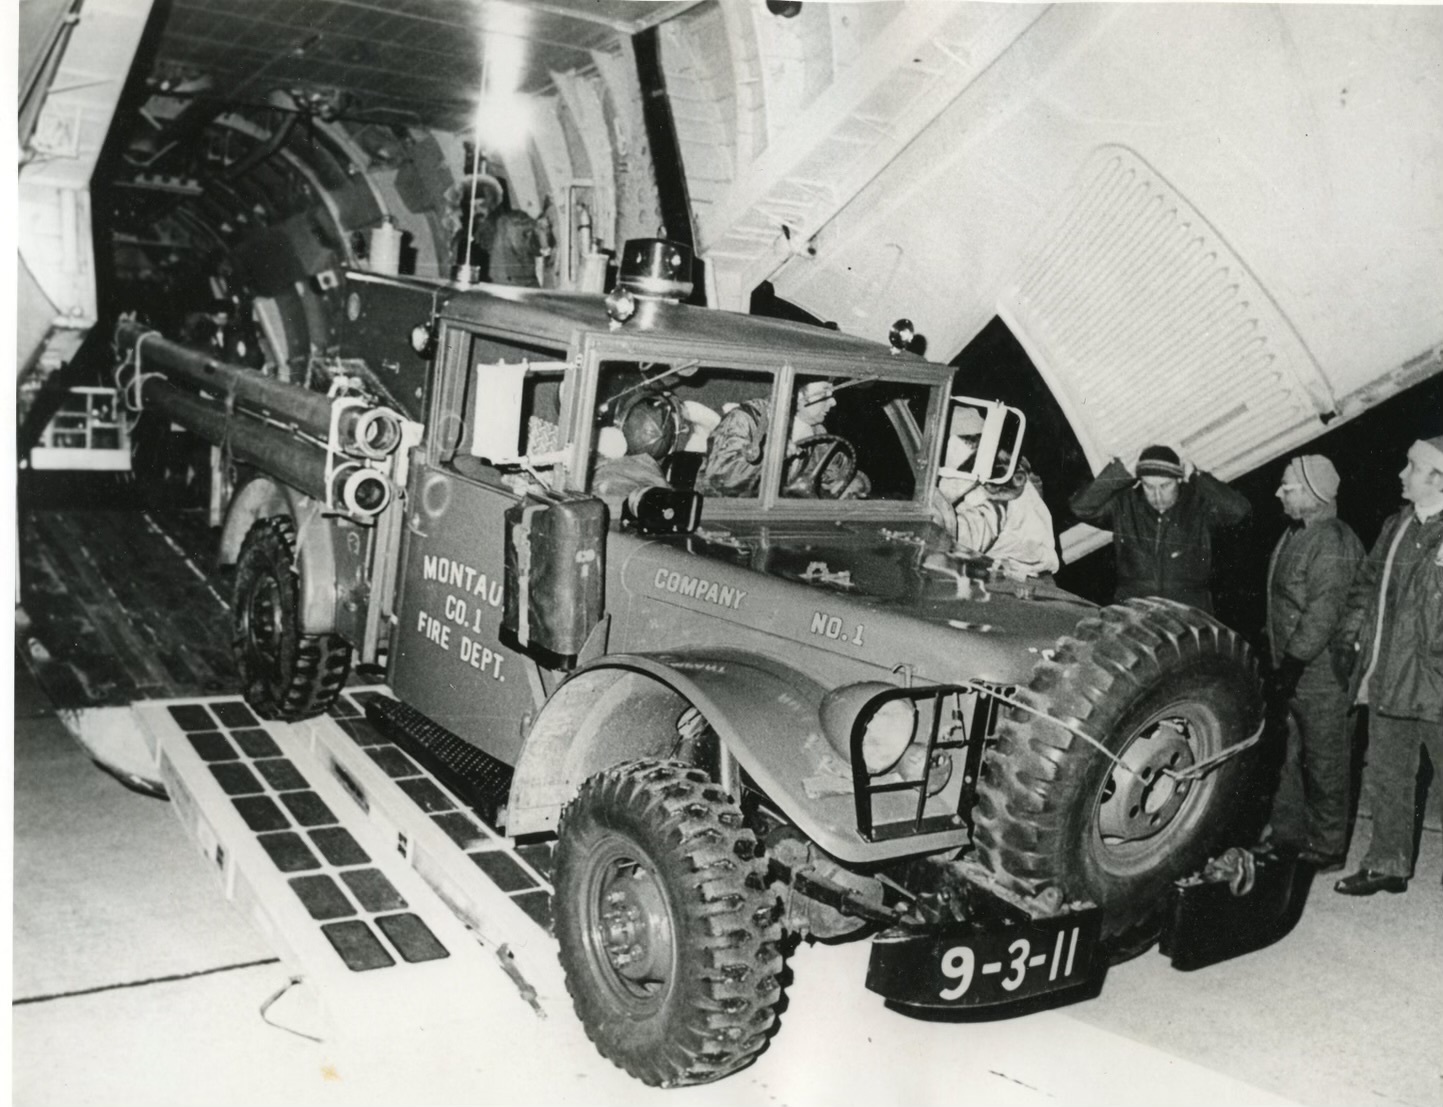 Members of the Montauk Fire Department load their World War II era fire truck onto a military cargo plane to be flown to Buffalo in February 1977 as part of an effort to help the city cope with a blizzard that dumped more than 100 inches of snow in three days.